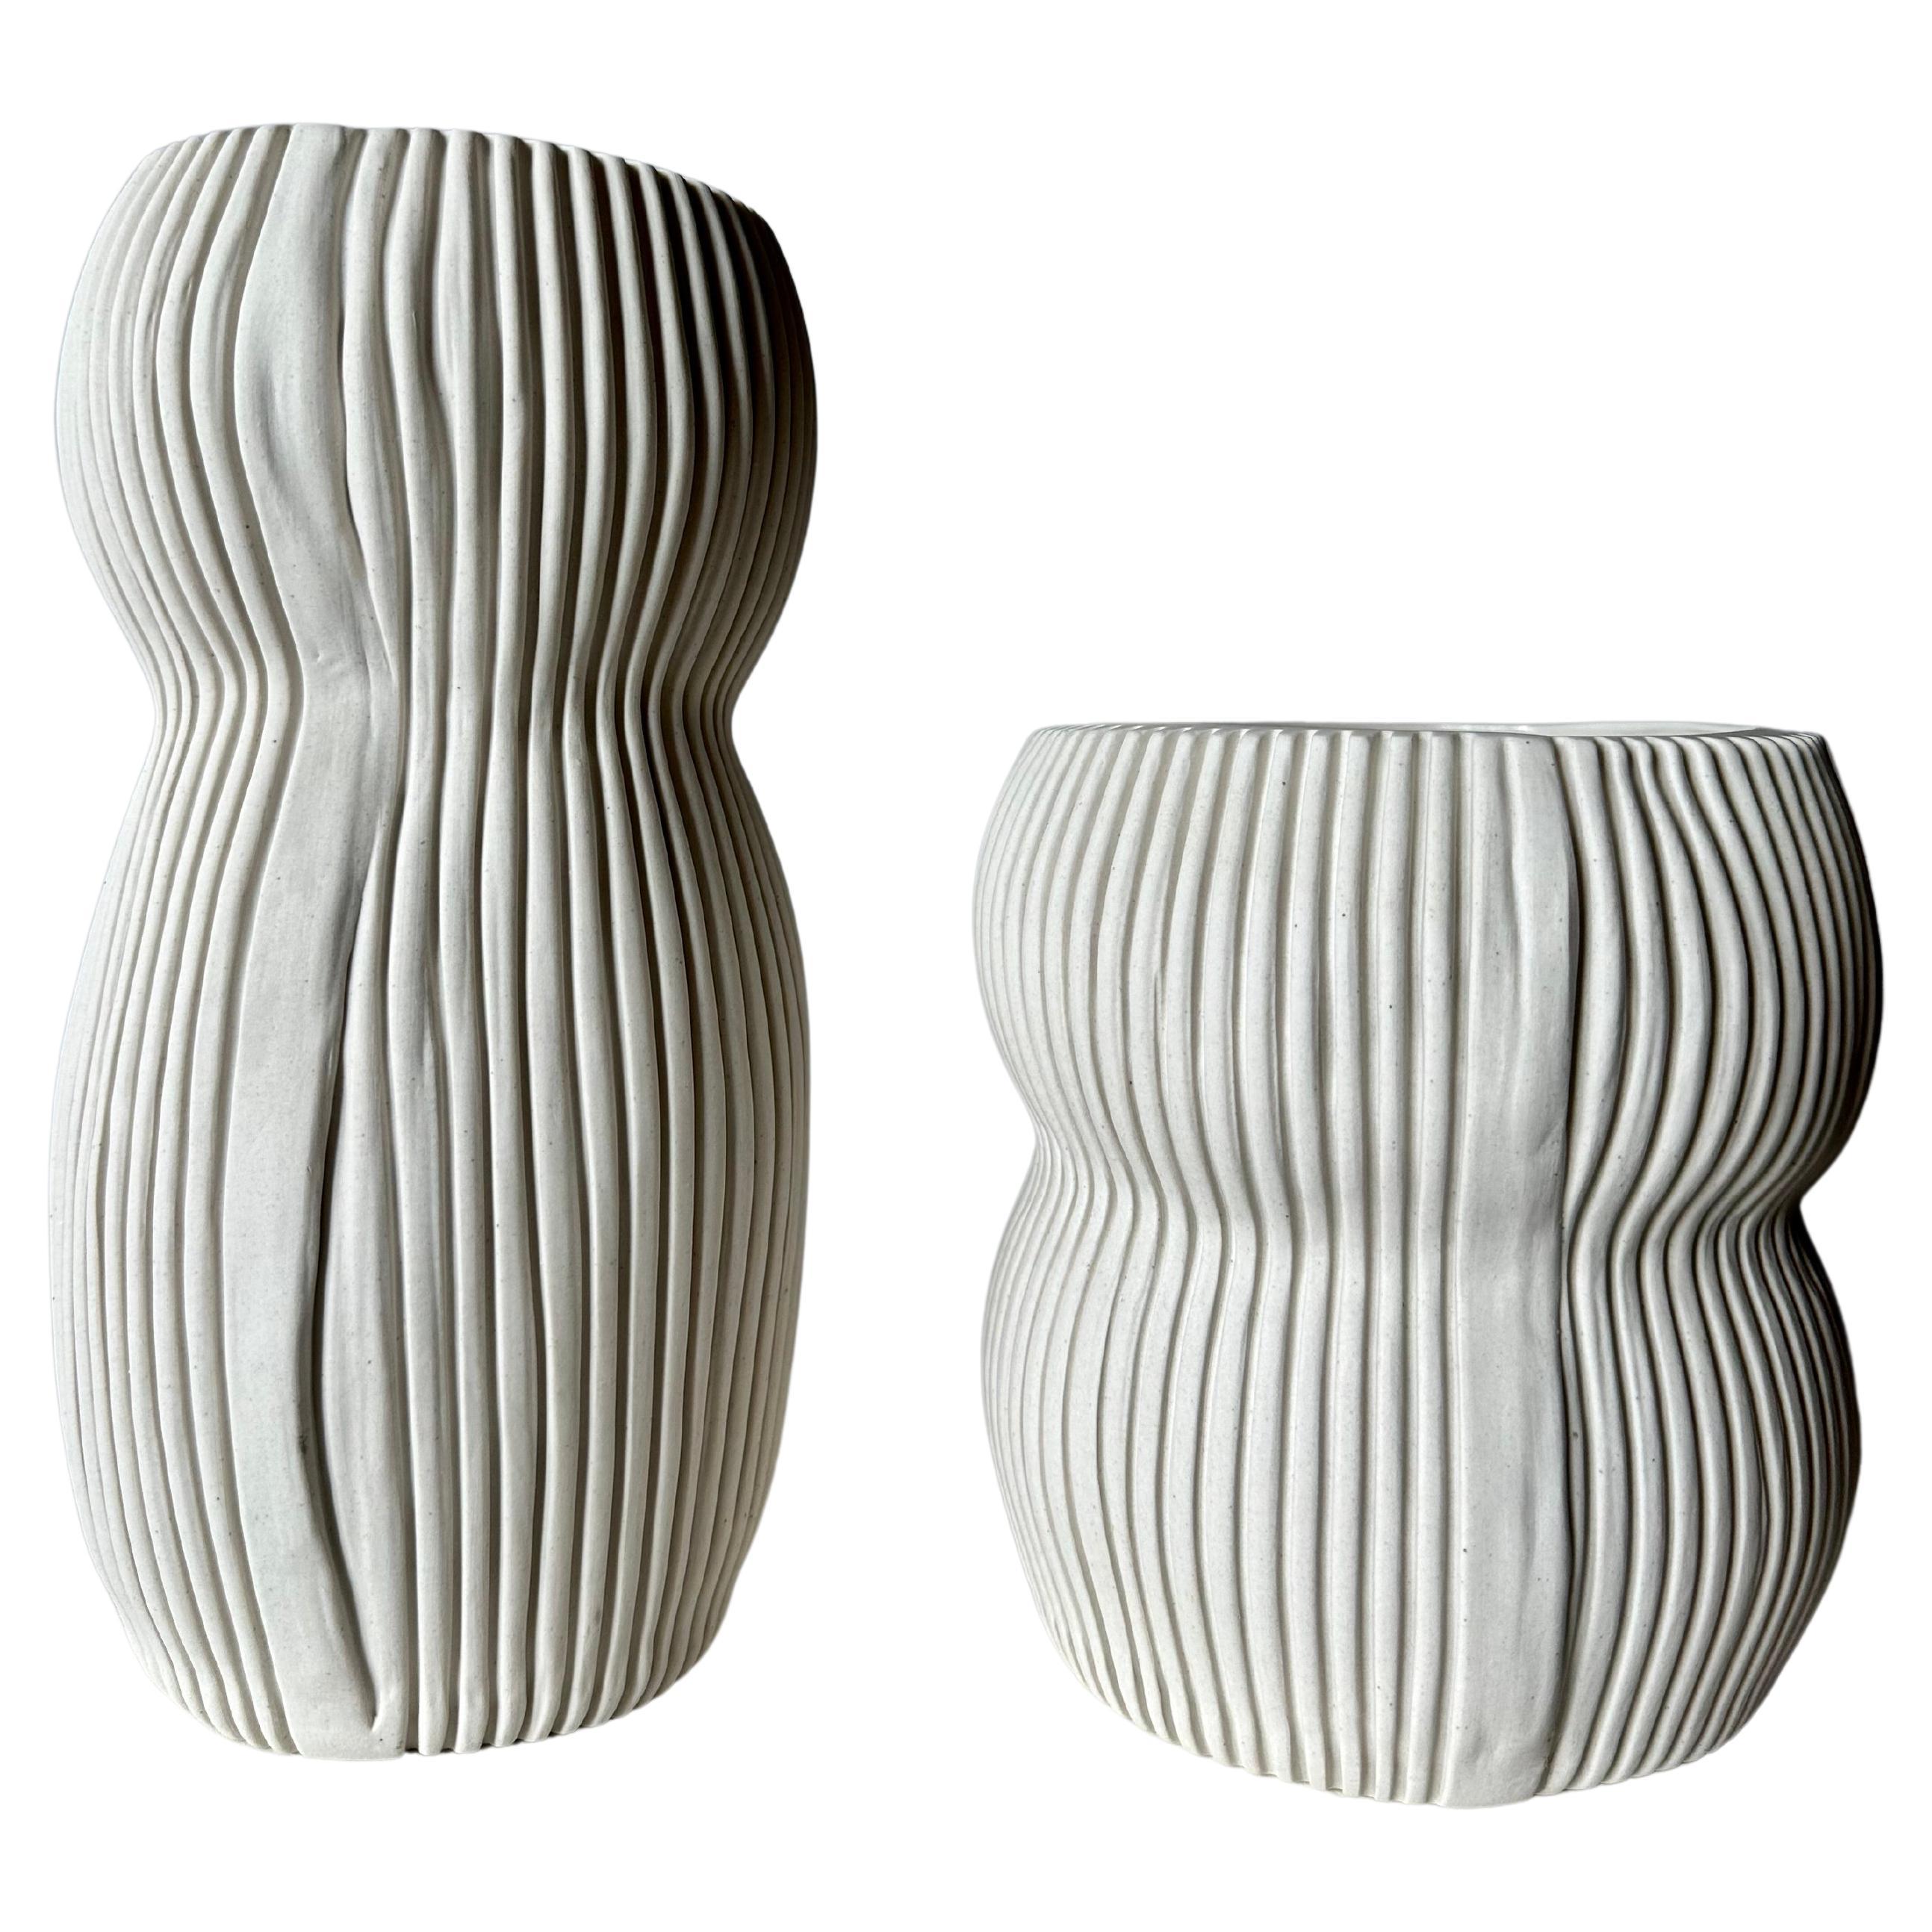 Pair of Curvy Textured White Porcelain Vases, by Cym Warkov For Sale